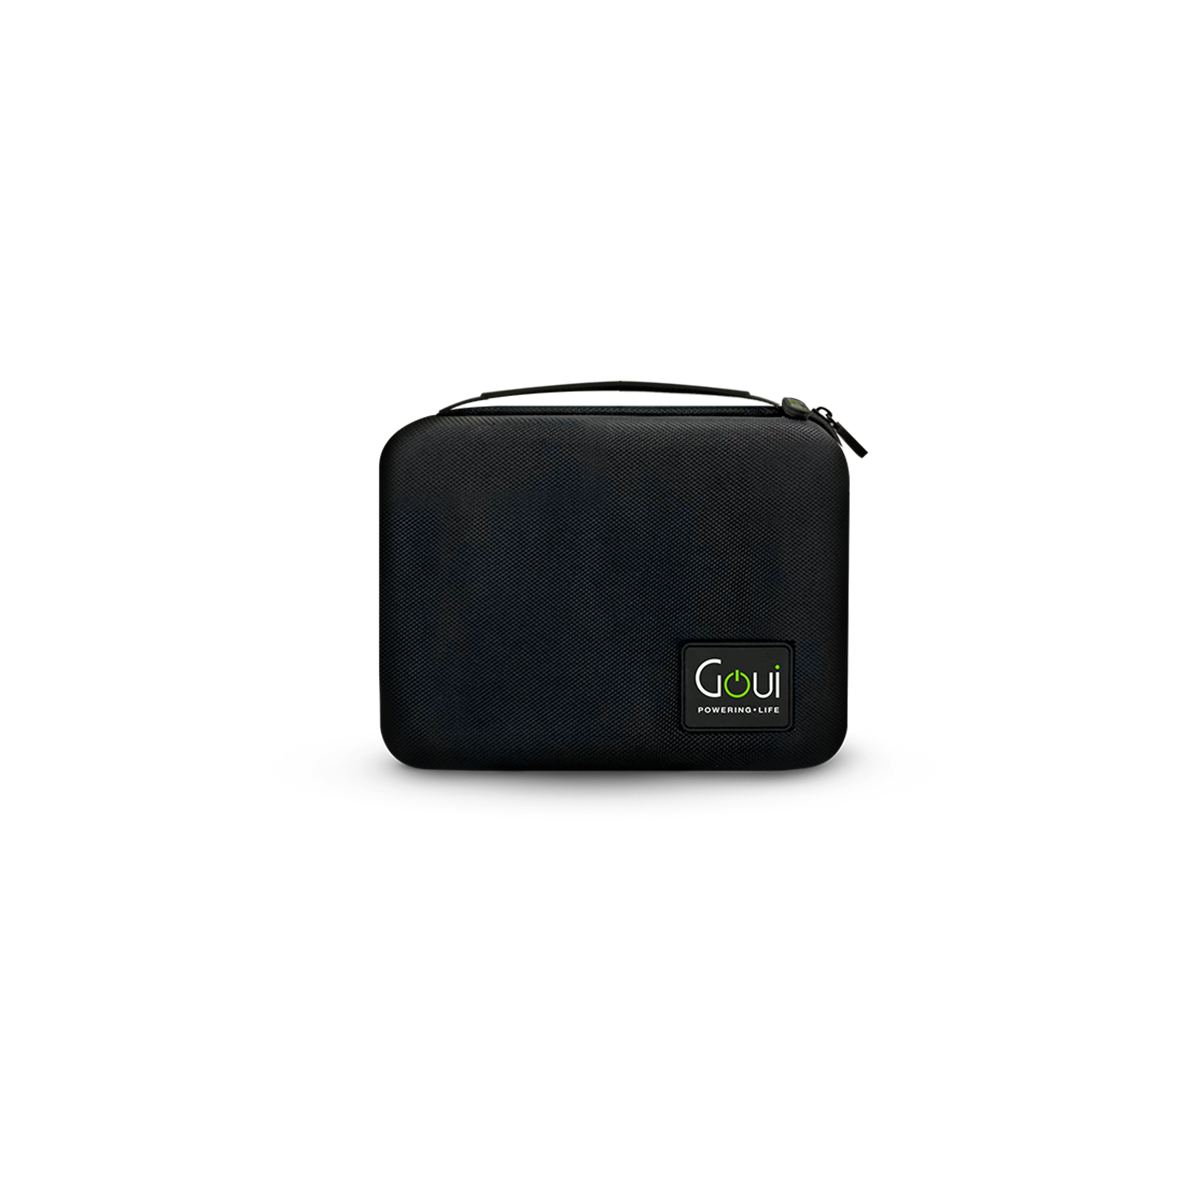 Goui Bag (Case) for Mobile Accessories - Small